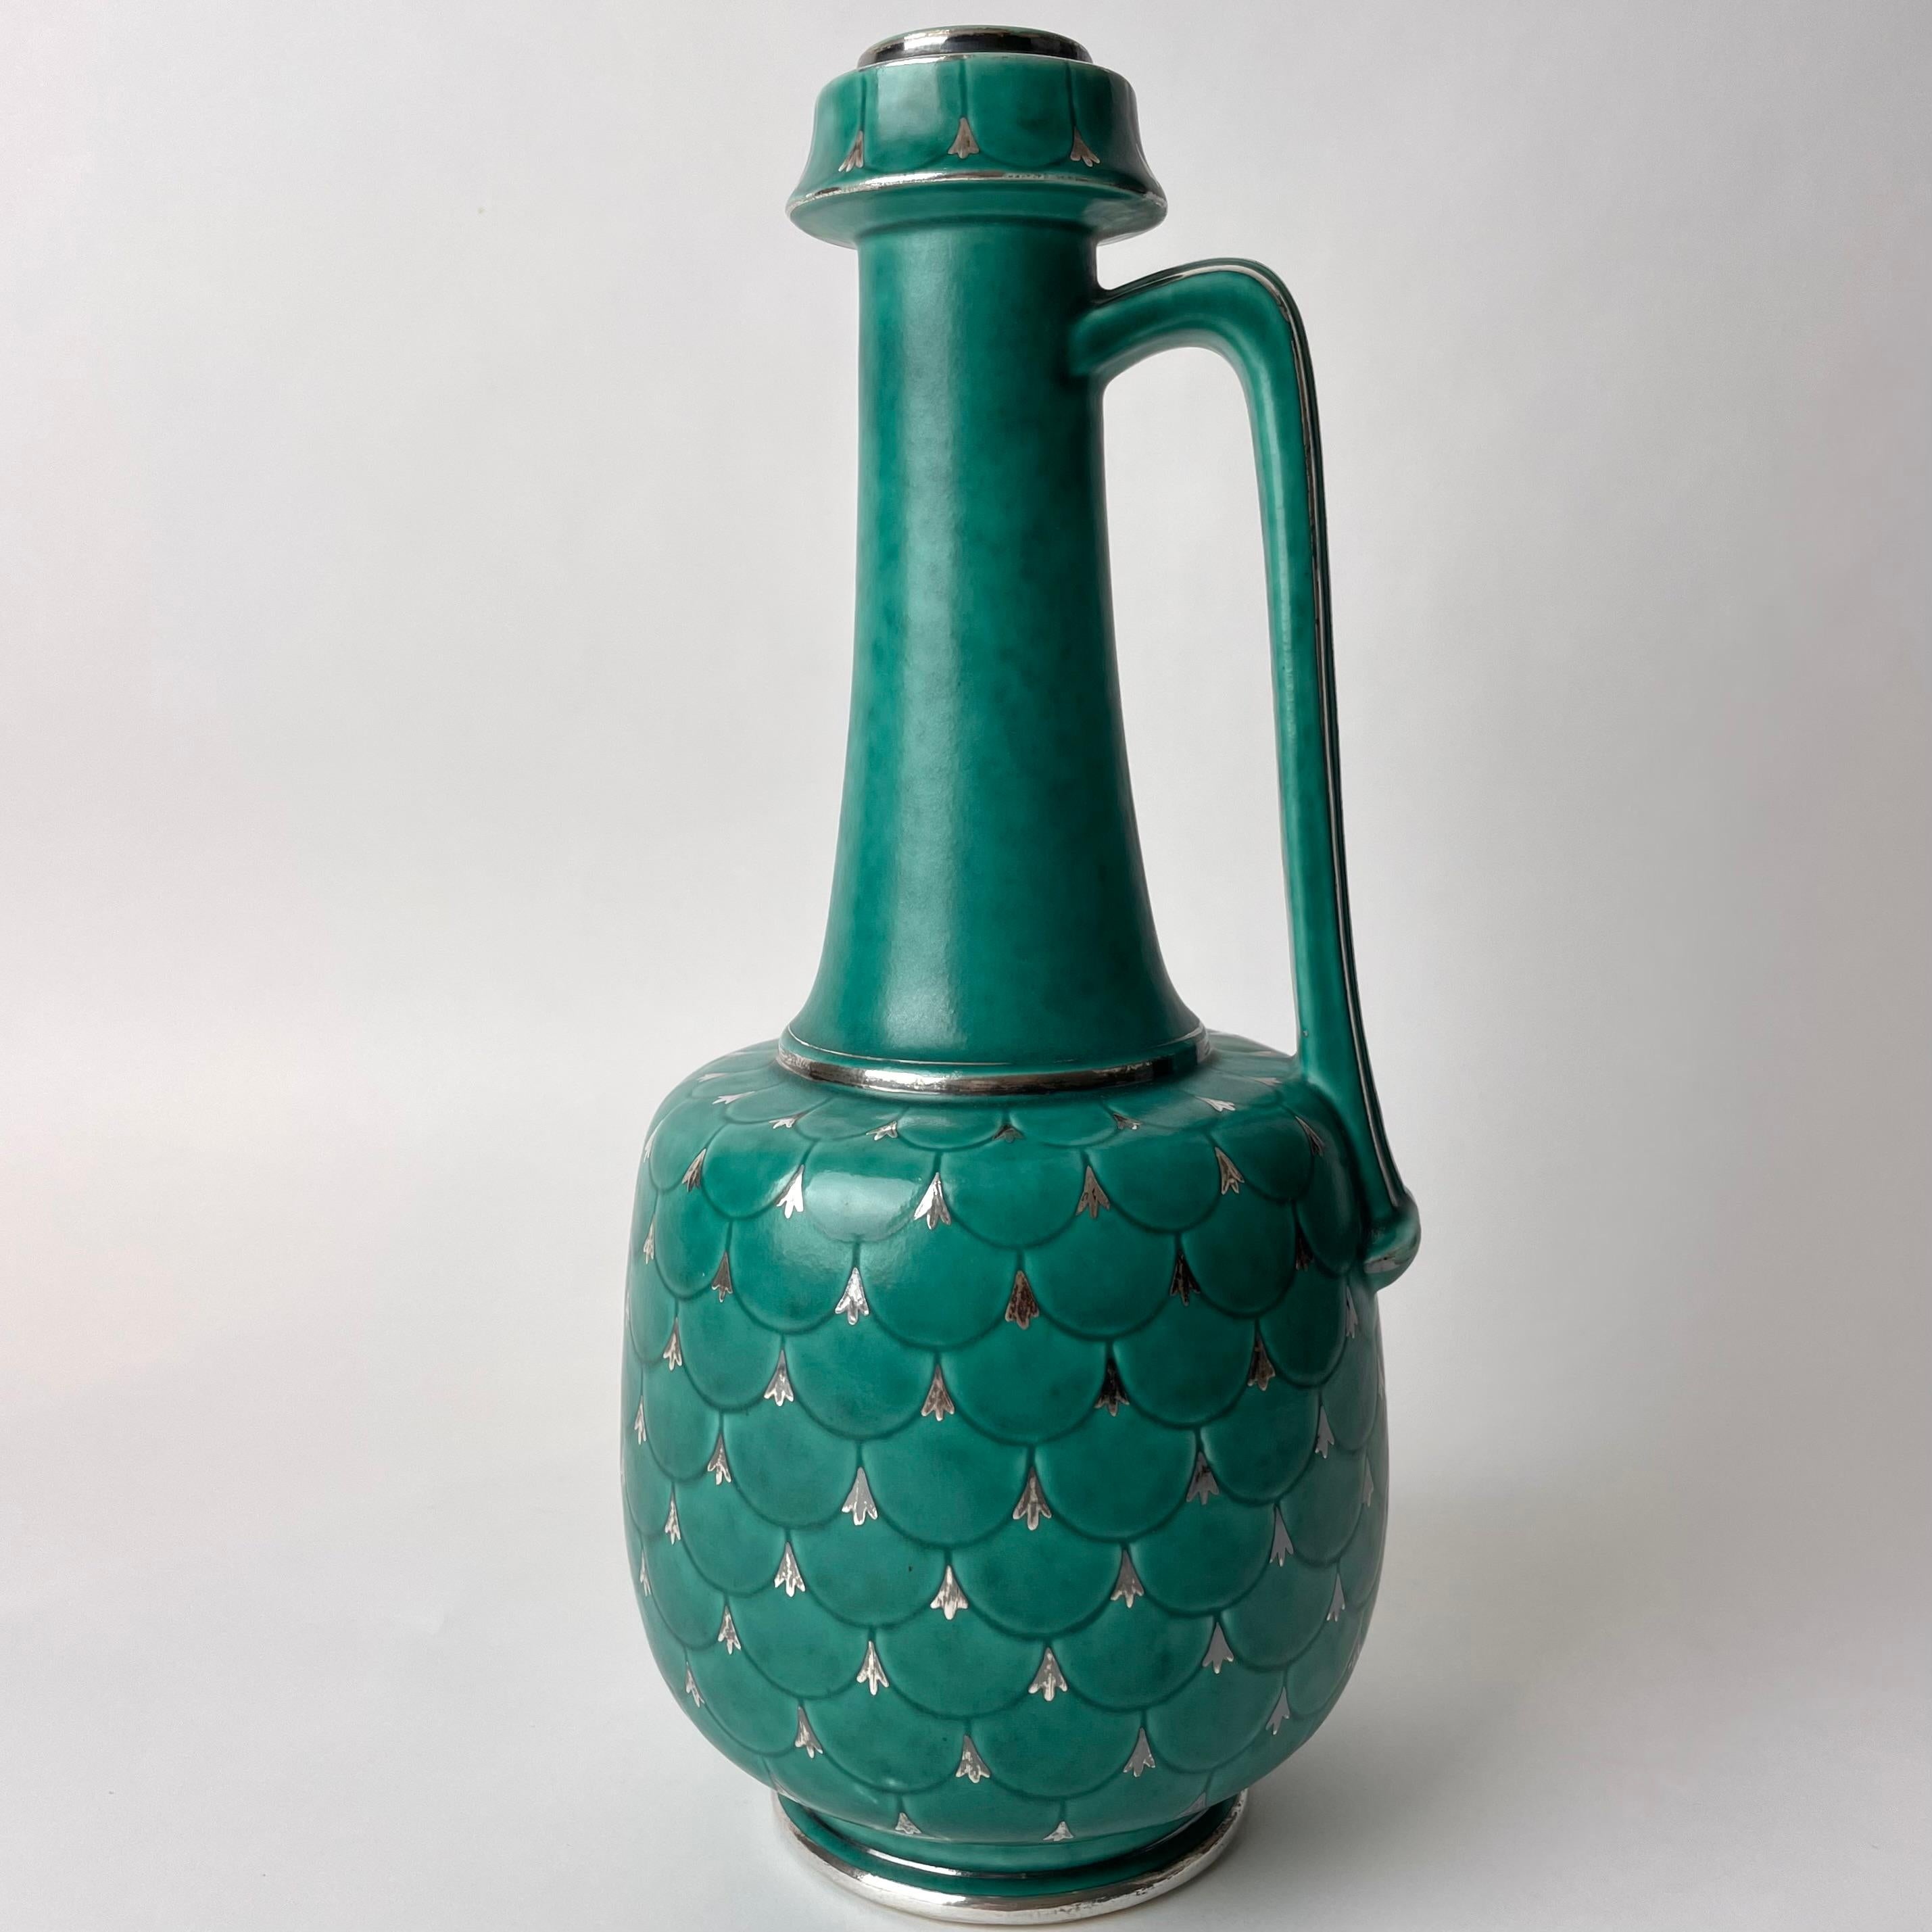 Swedish Grace Ceramic Handle Vase, Argenta collection from the prominent Swedish Gustavsberg company, 1930s-1940s Sweden

This beautiful Swedish Grace vase in turquoise ceramics with silver details was manufactured by prominent Swedish Gustavsberg